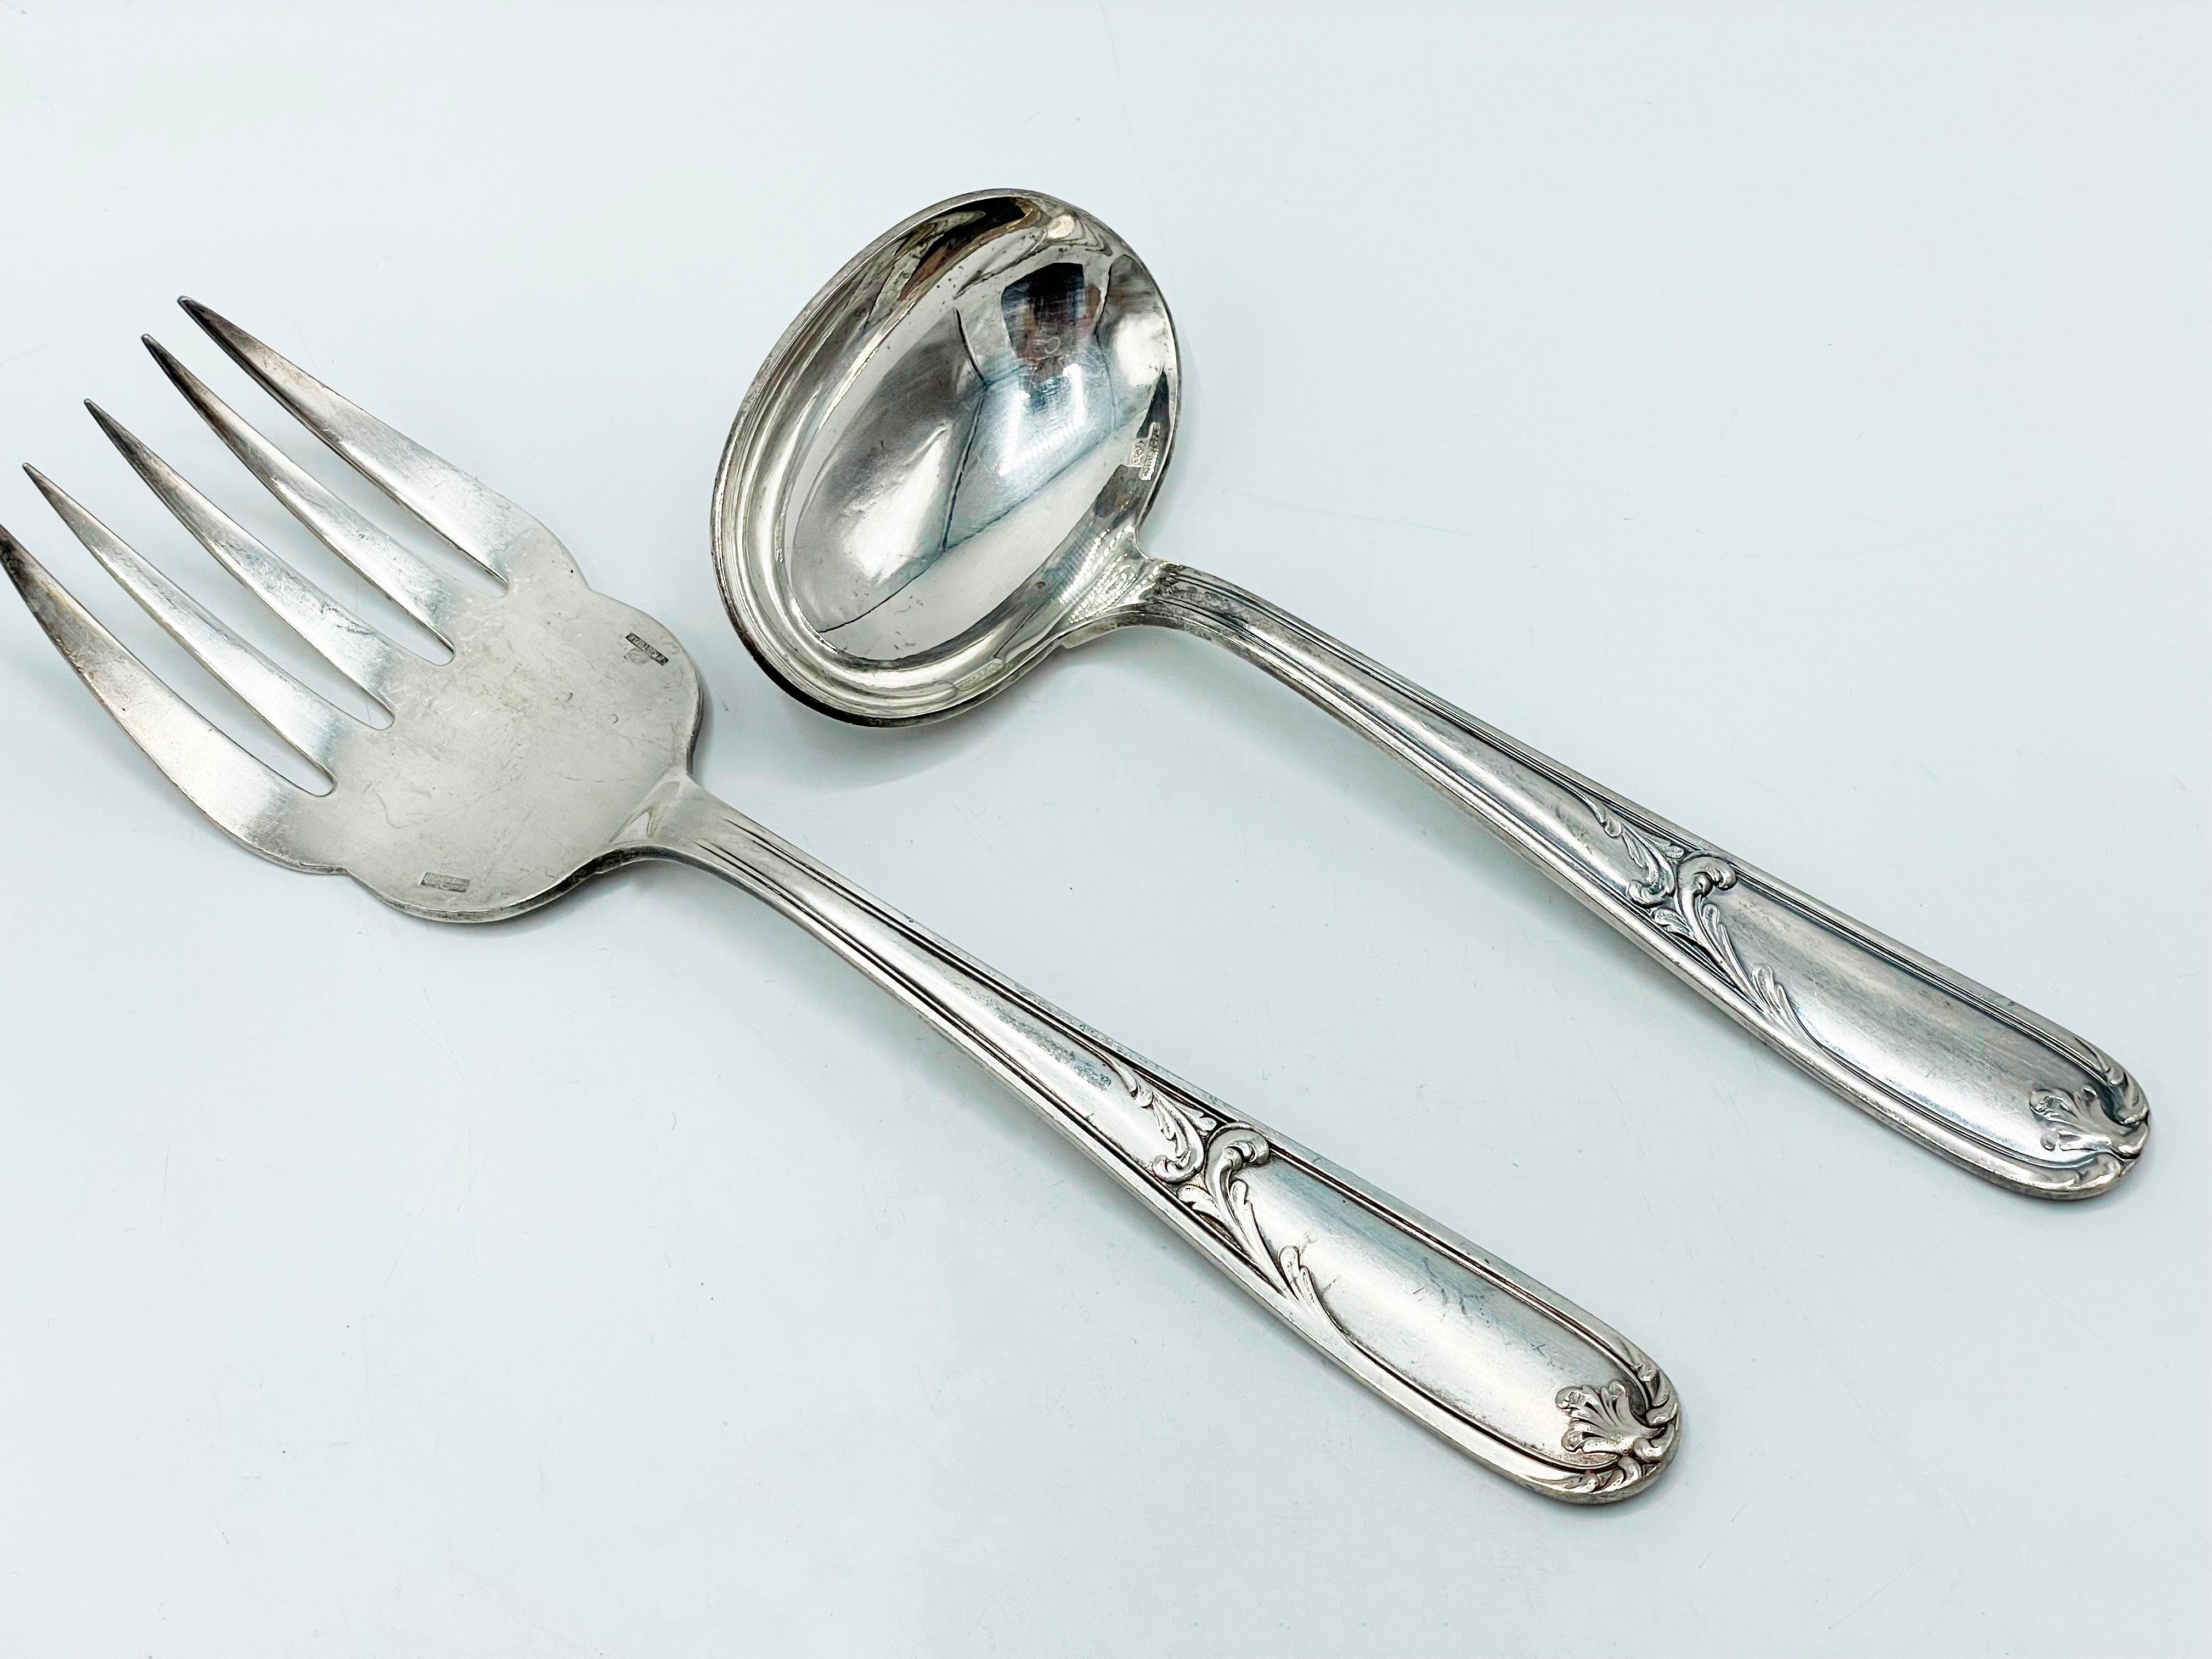 Christofle Made in Argentina, Flatware art nouveau in Silverplated 4